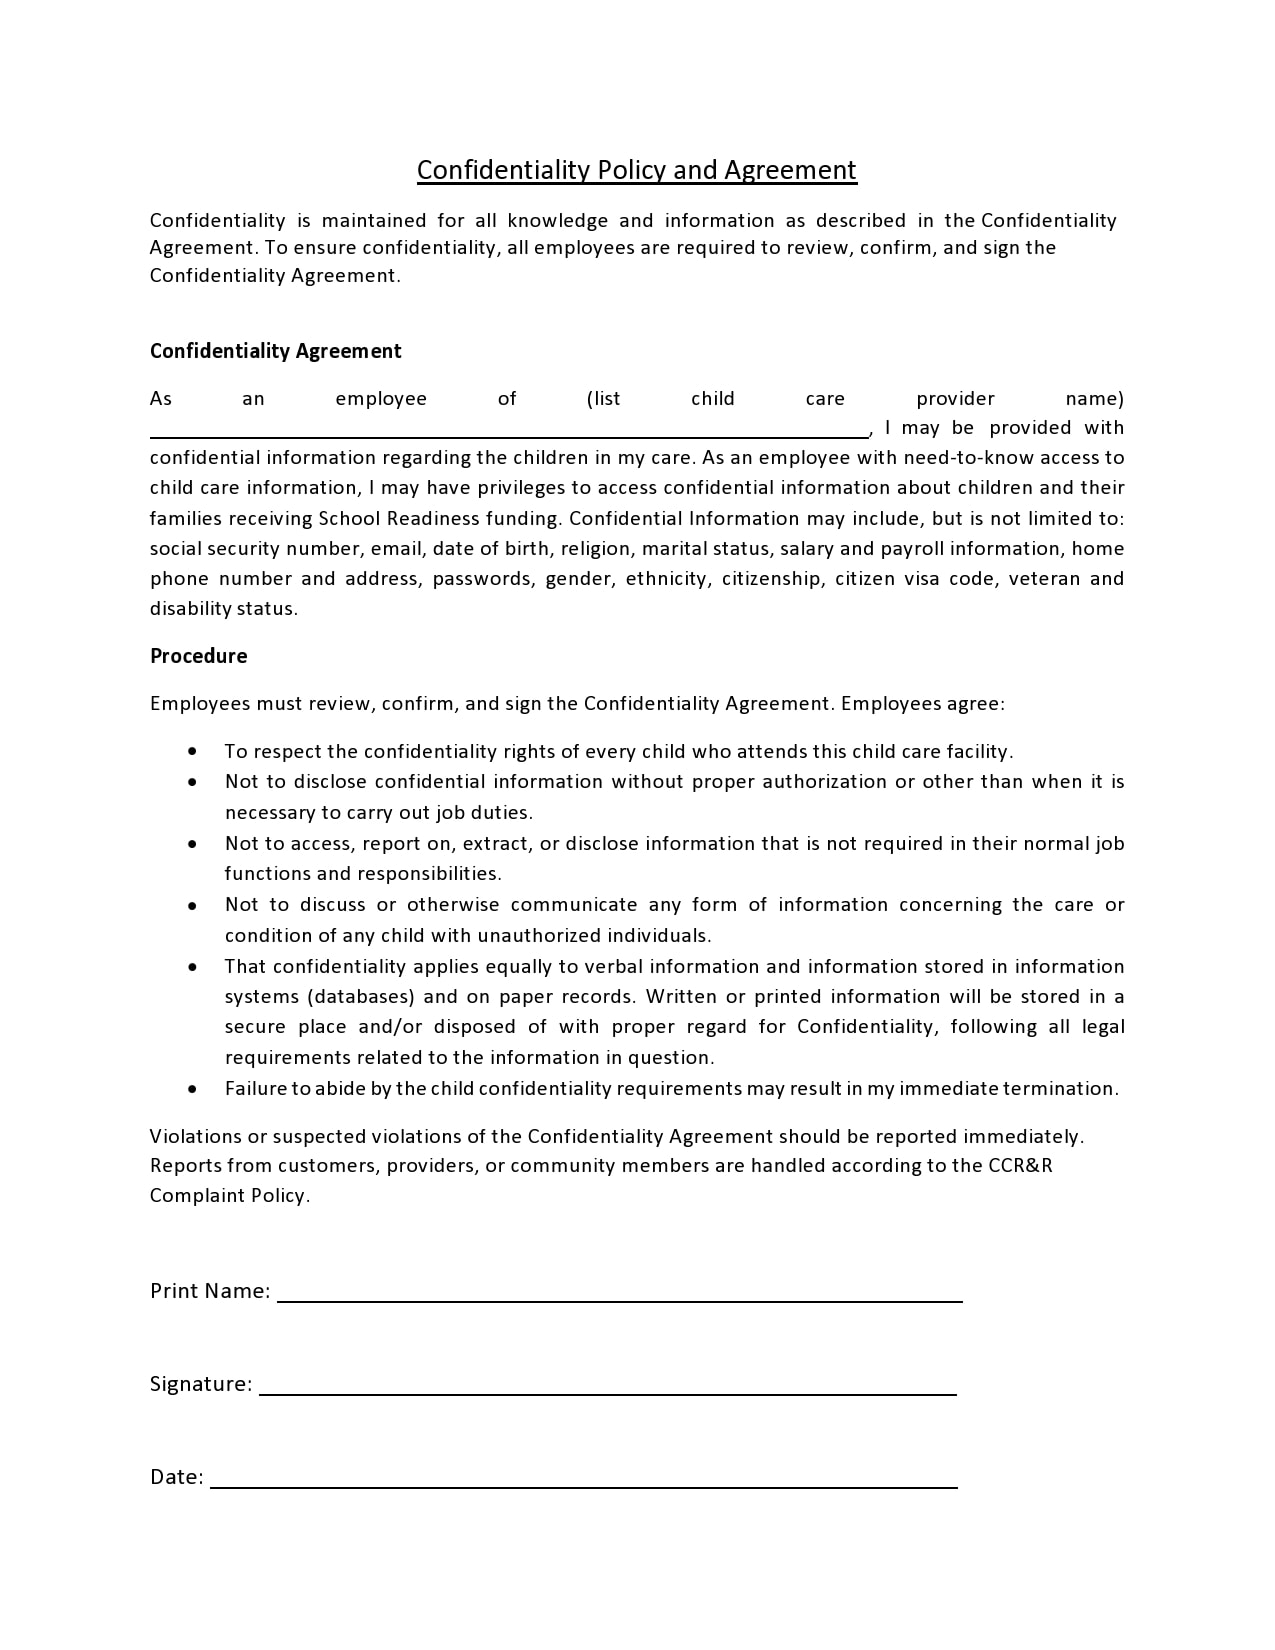 45-free-confidentiality-agreement-templates-nda-templatearchive